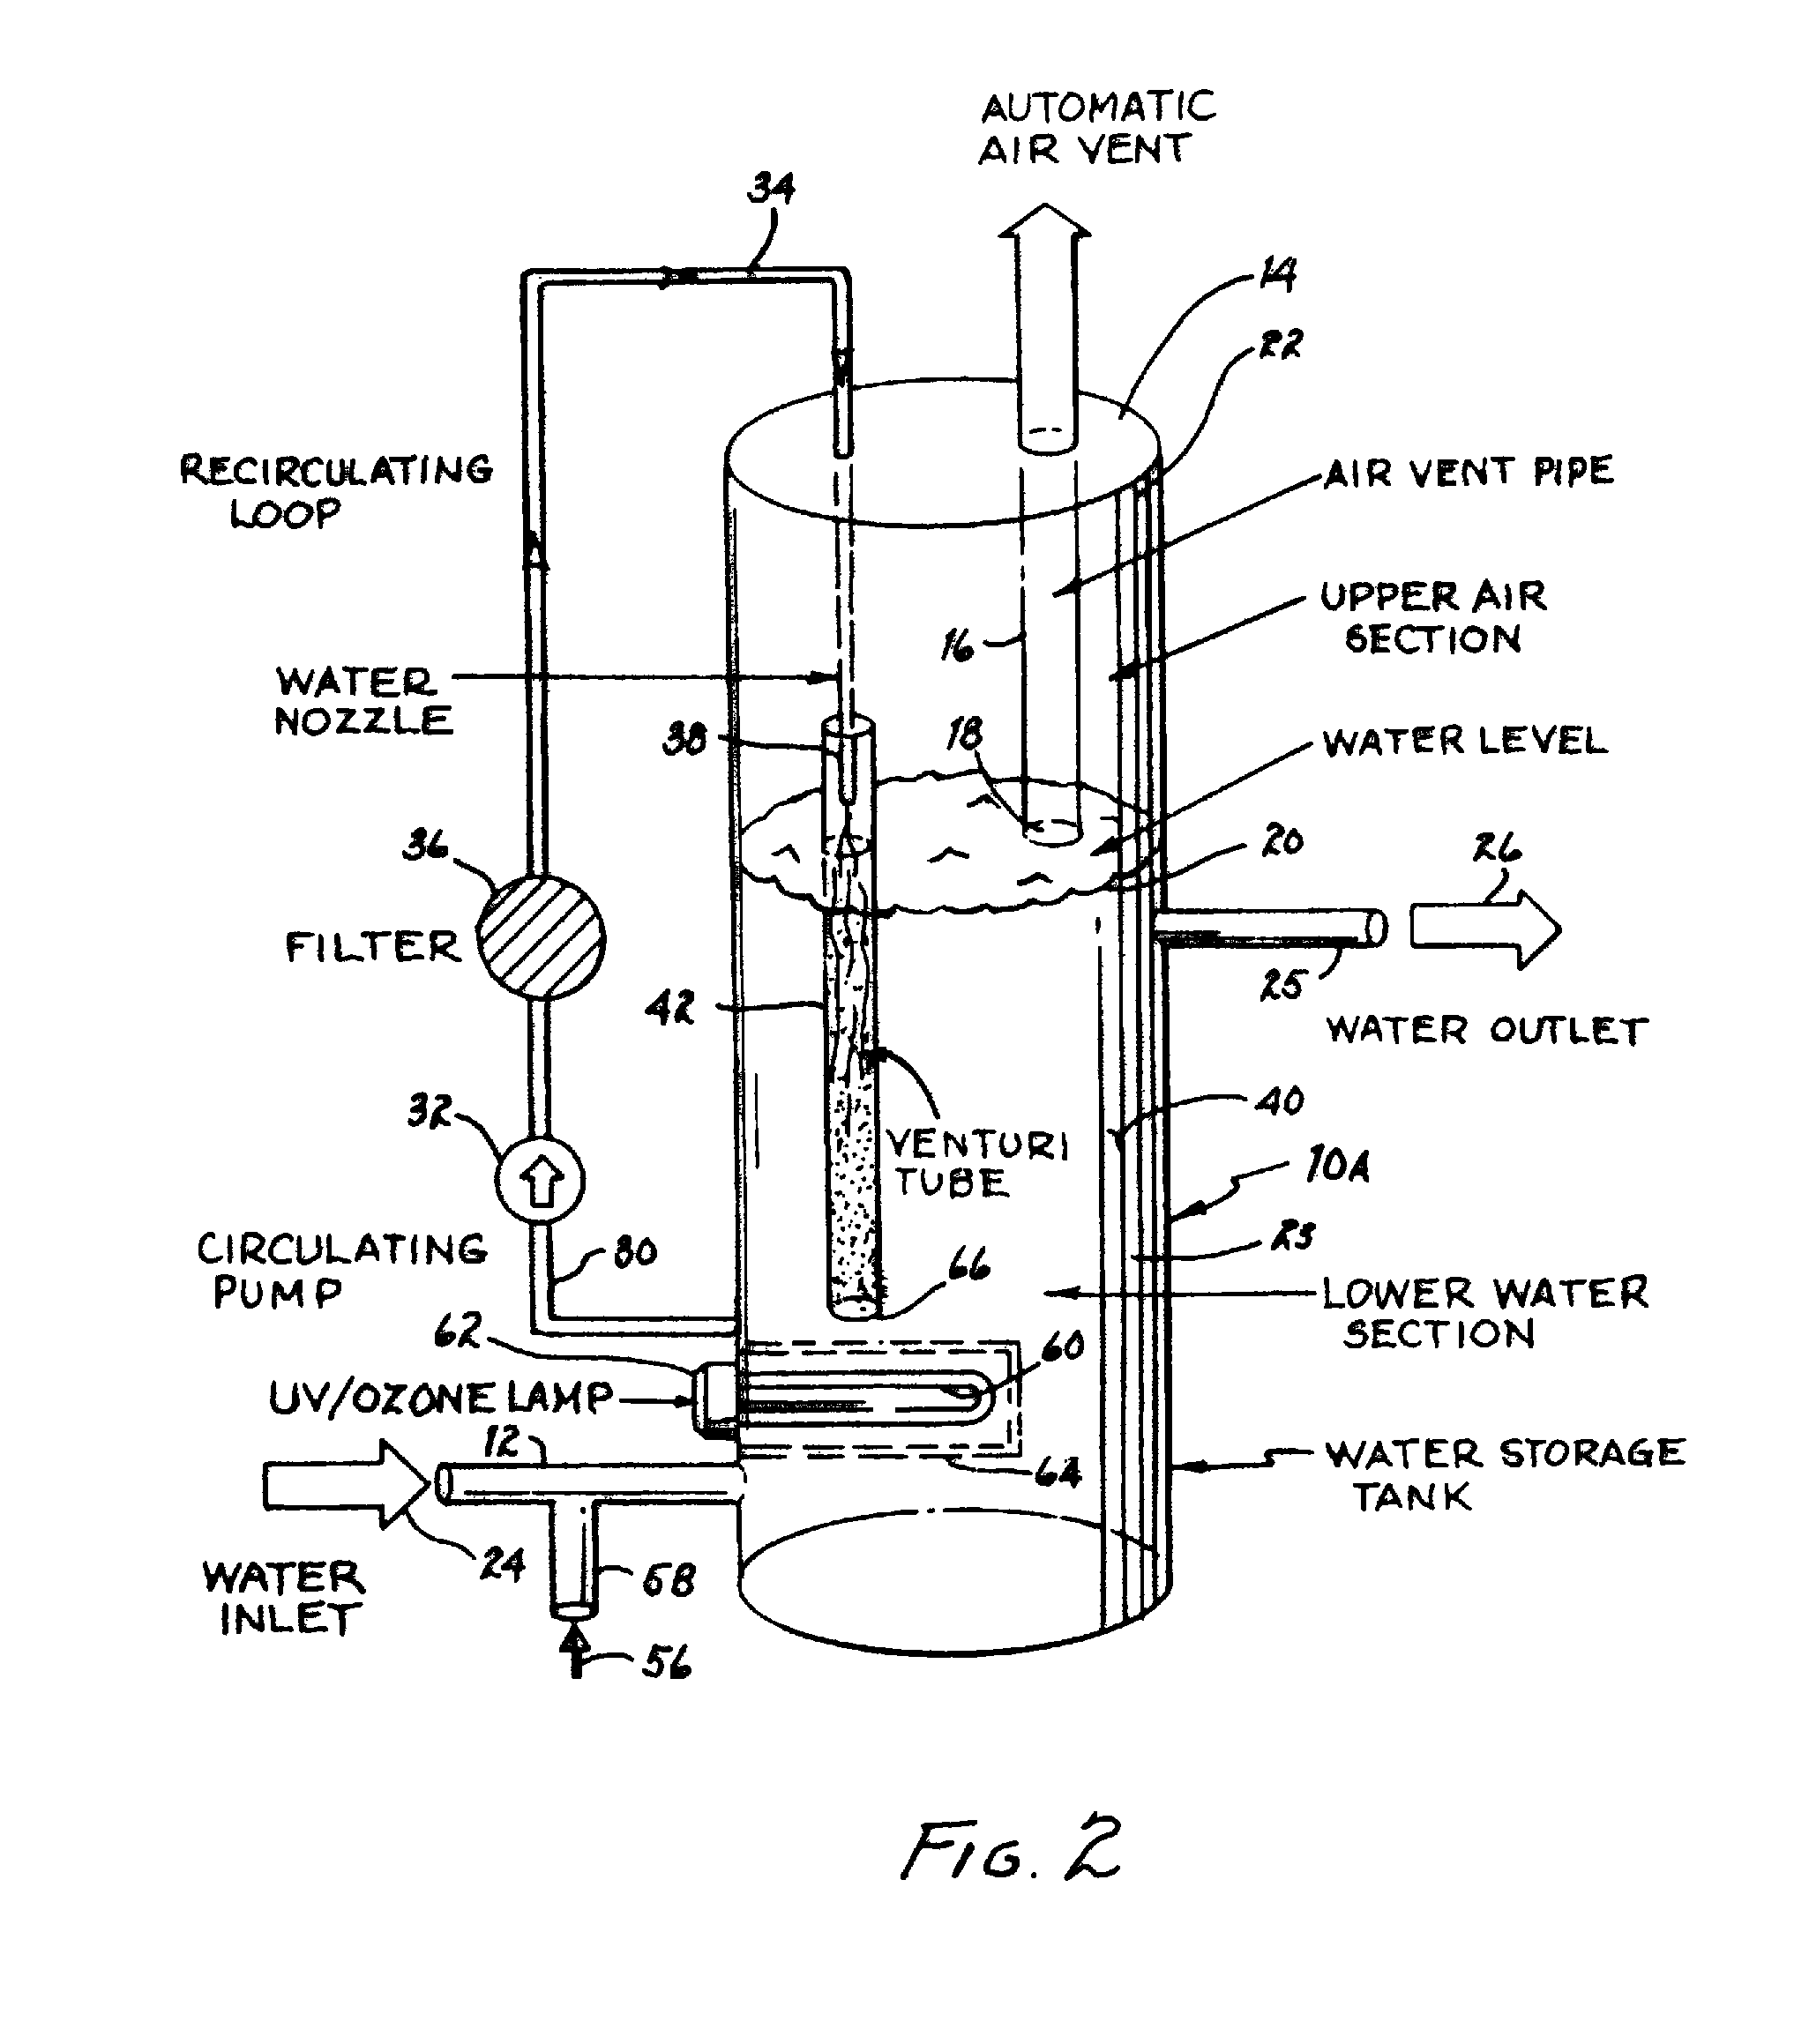 Apparatus and method for removing arsenic and inorganic compositions from water